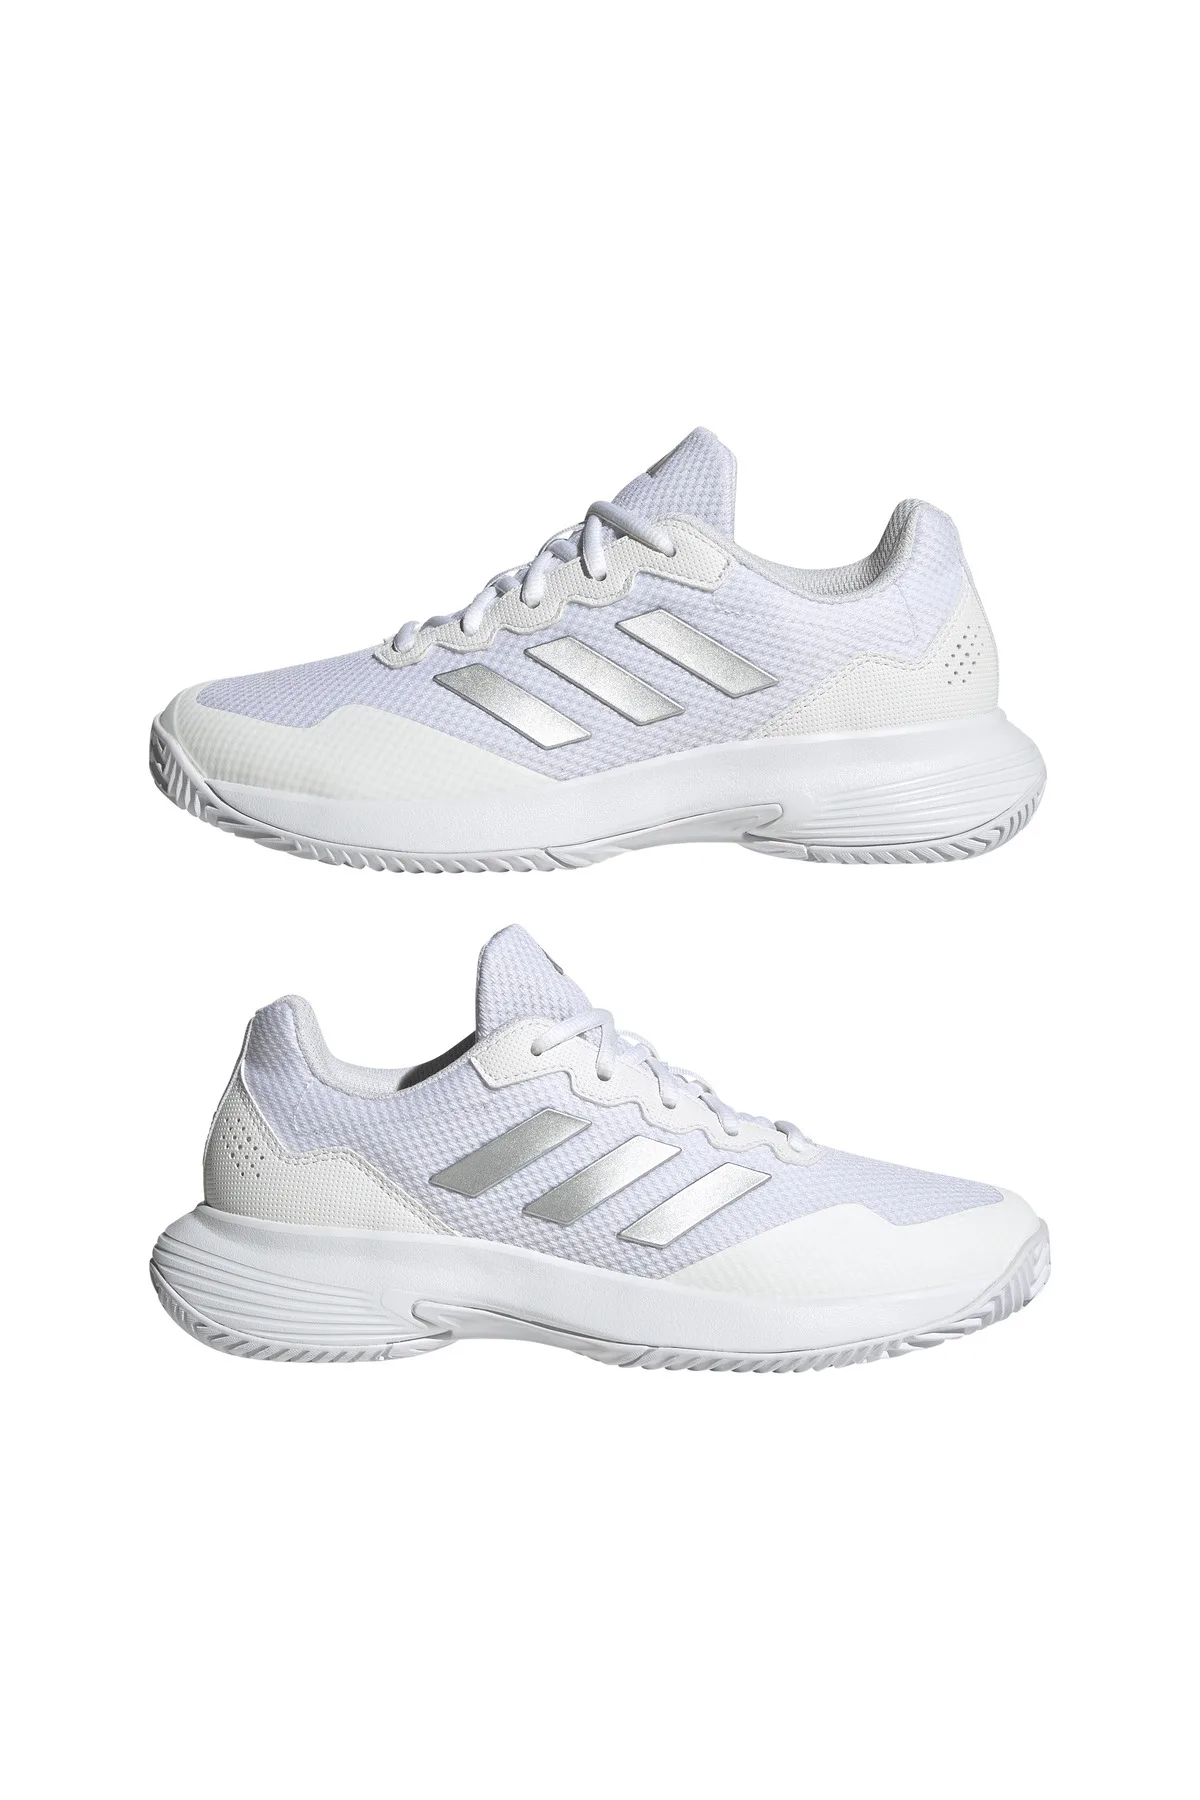 The Allure of Adidas Women’s Tennis Shoes插图3